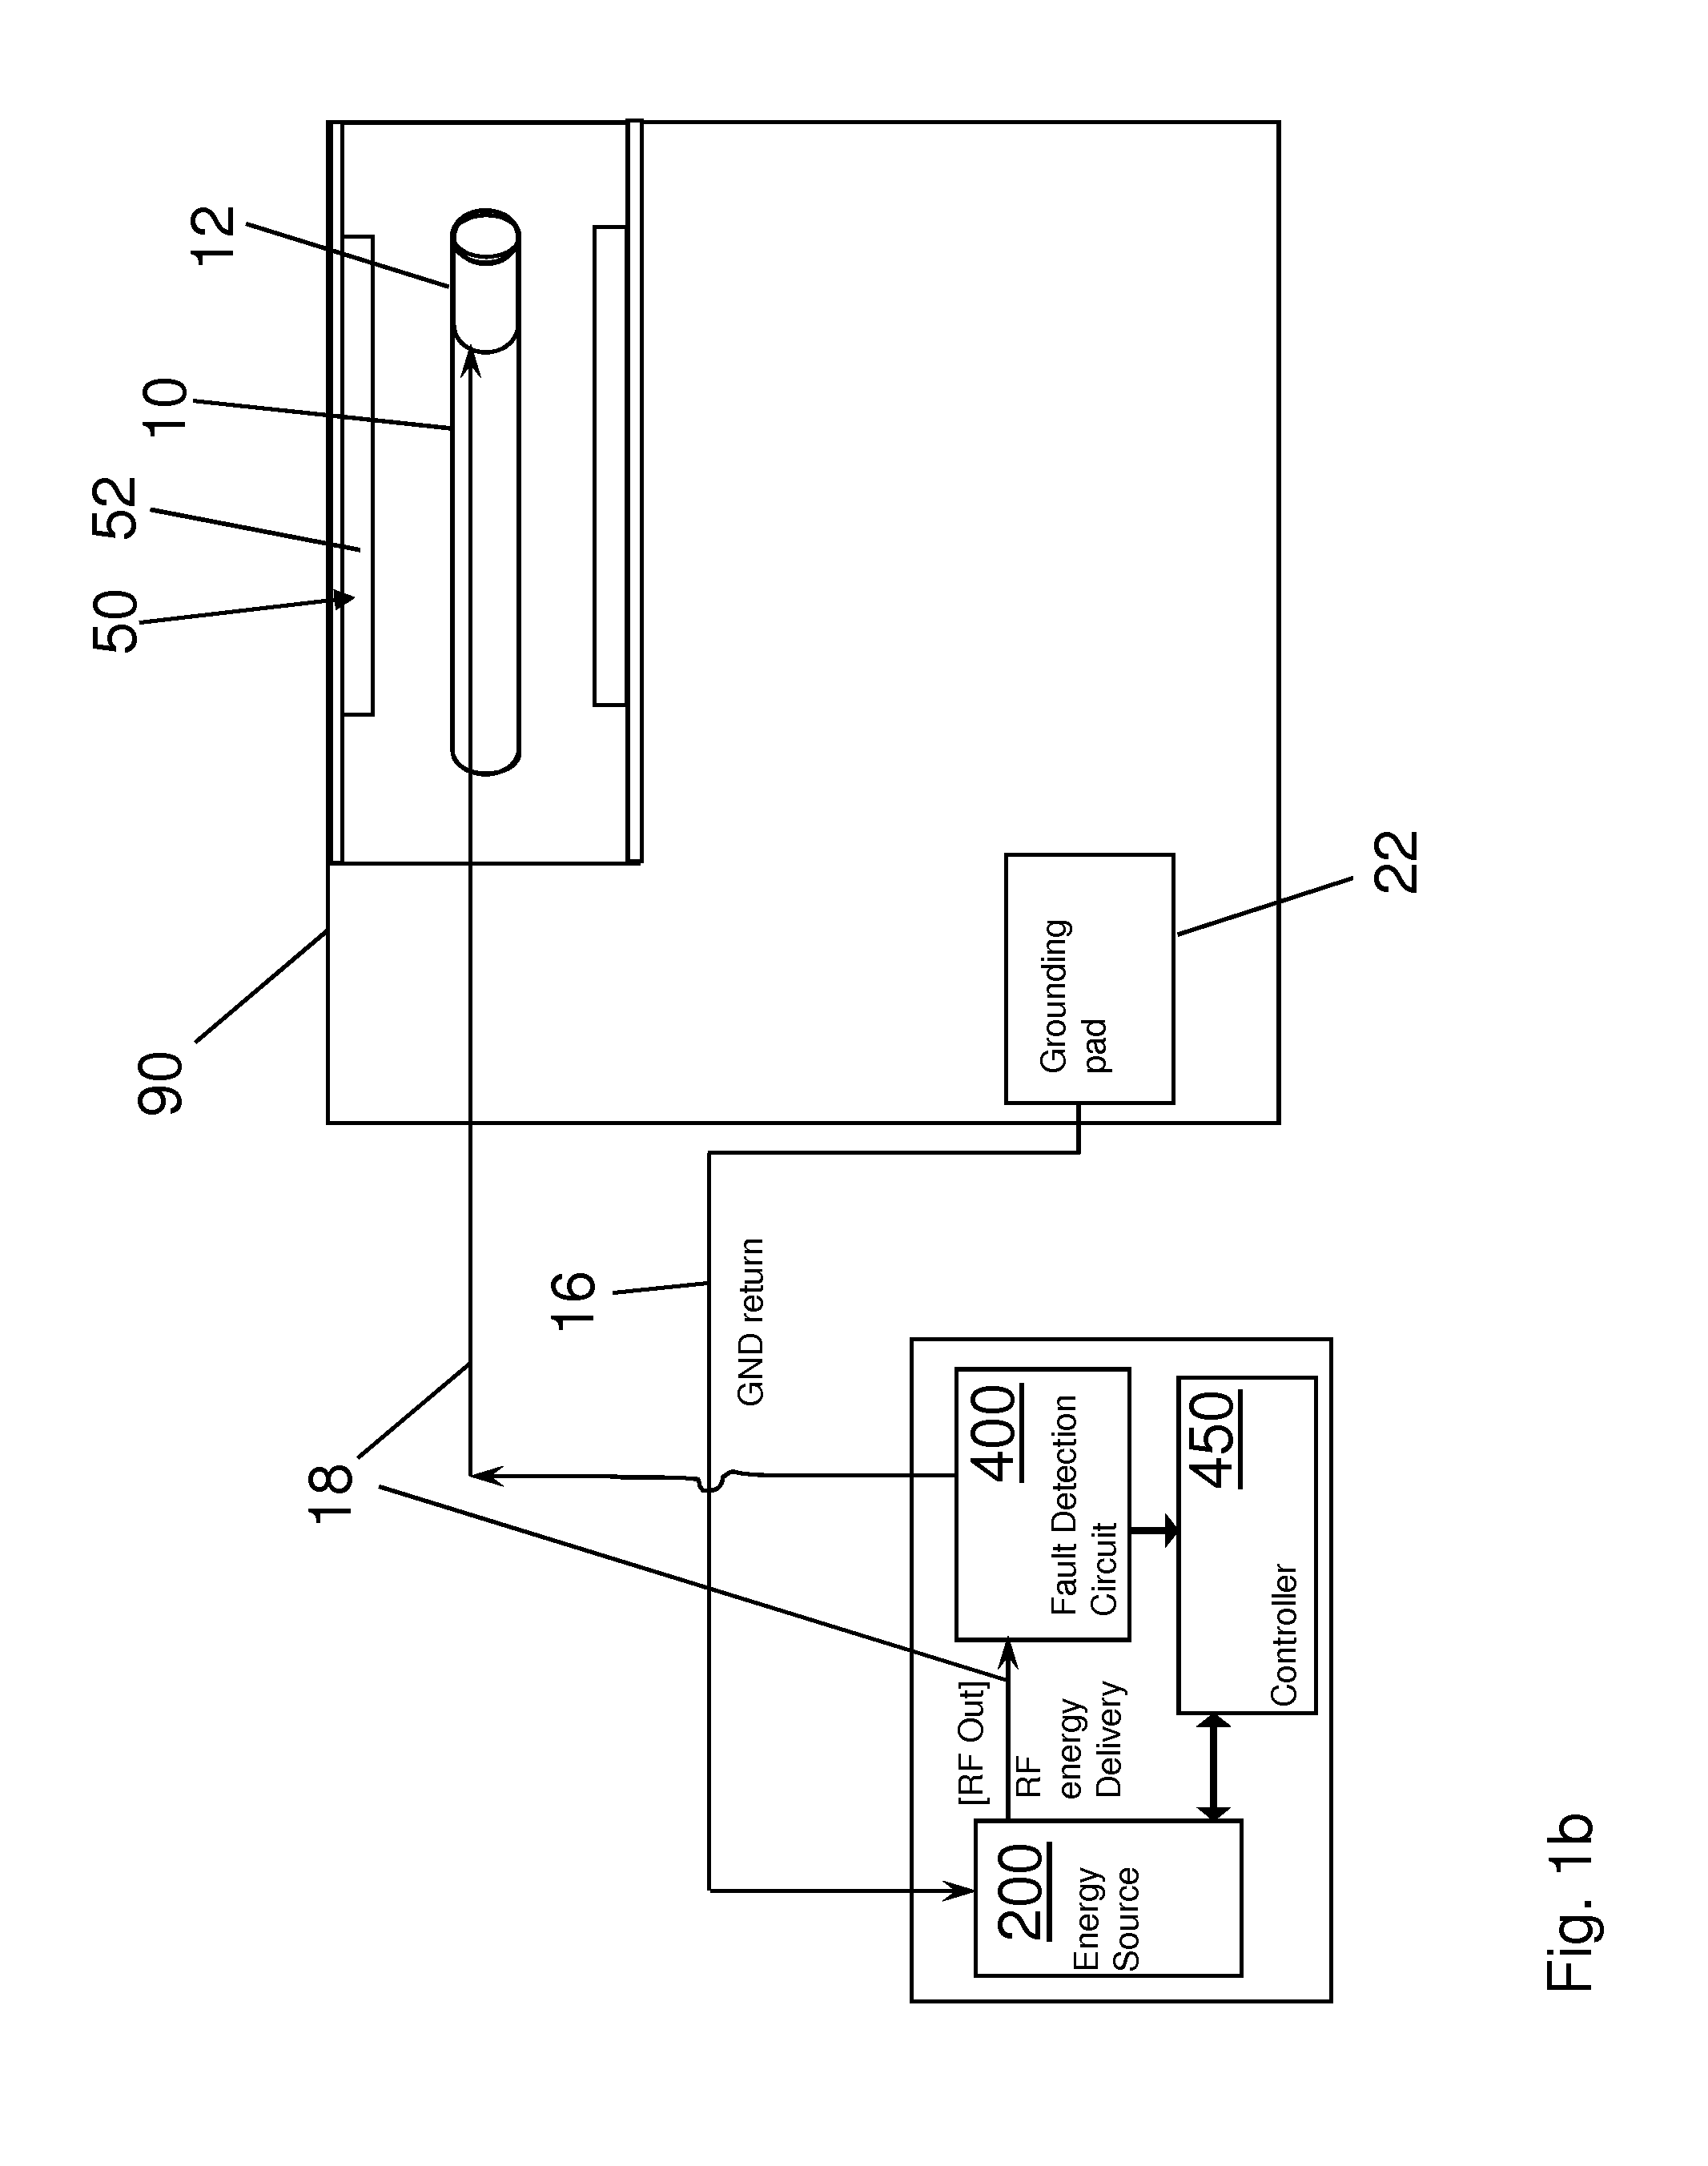 Monitoring and controlling energy delivery of an electrosurgical device